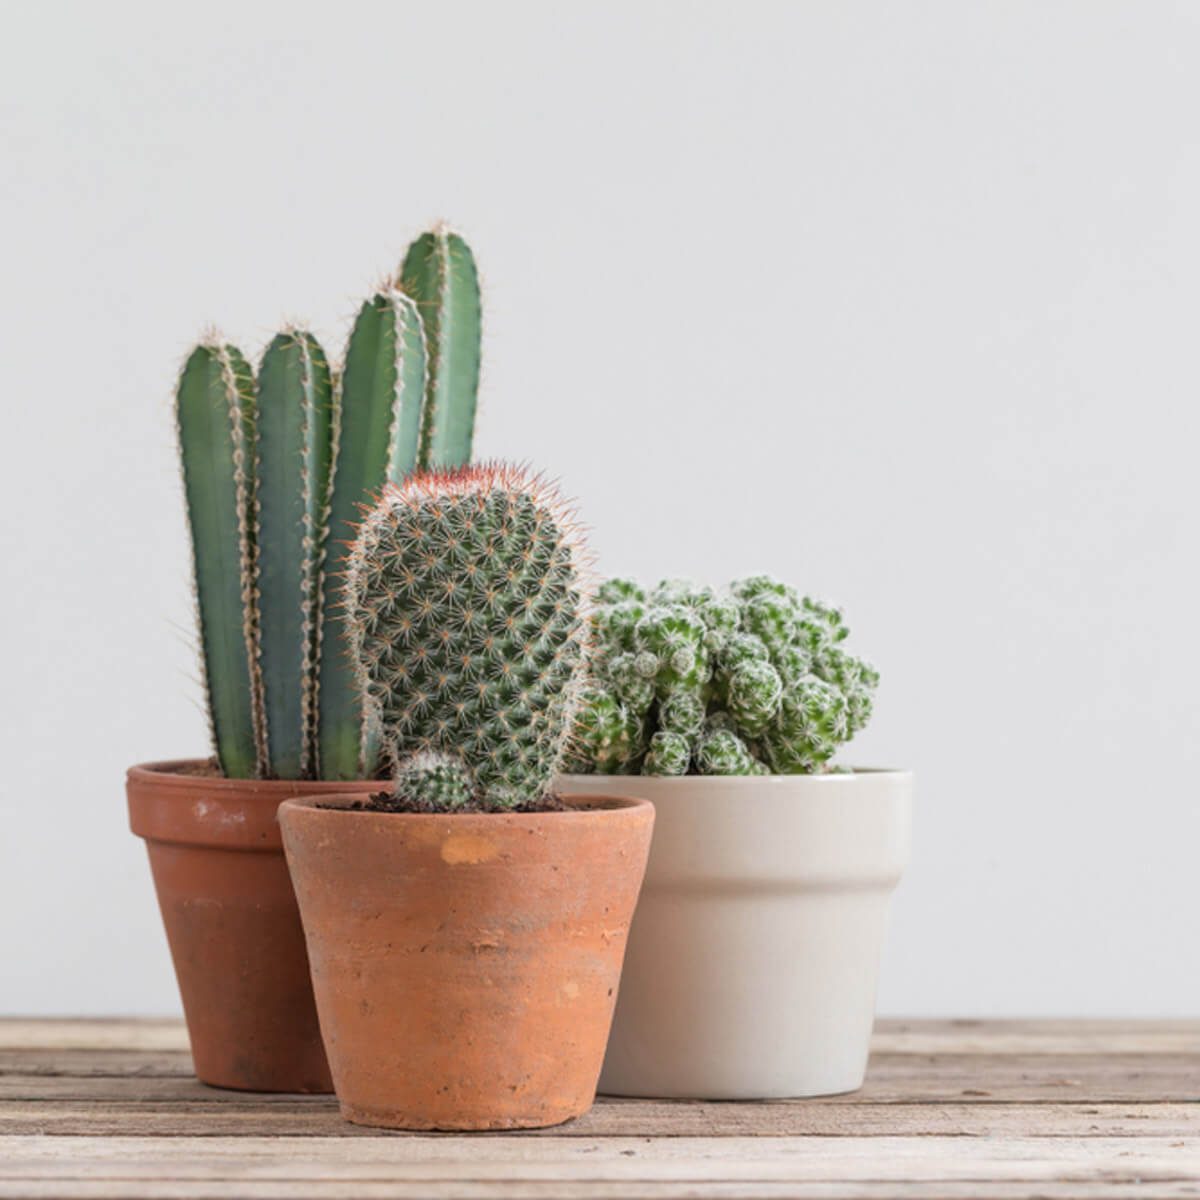 13 Ways to Decorate Your Home with Cactus